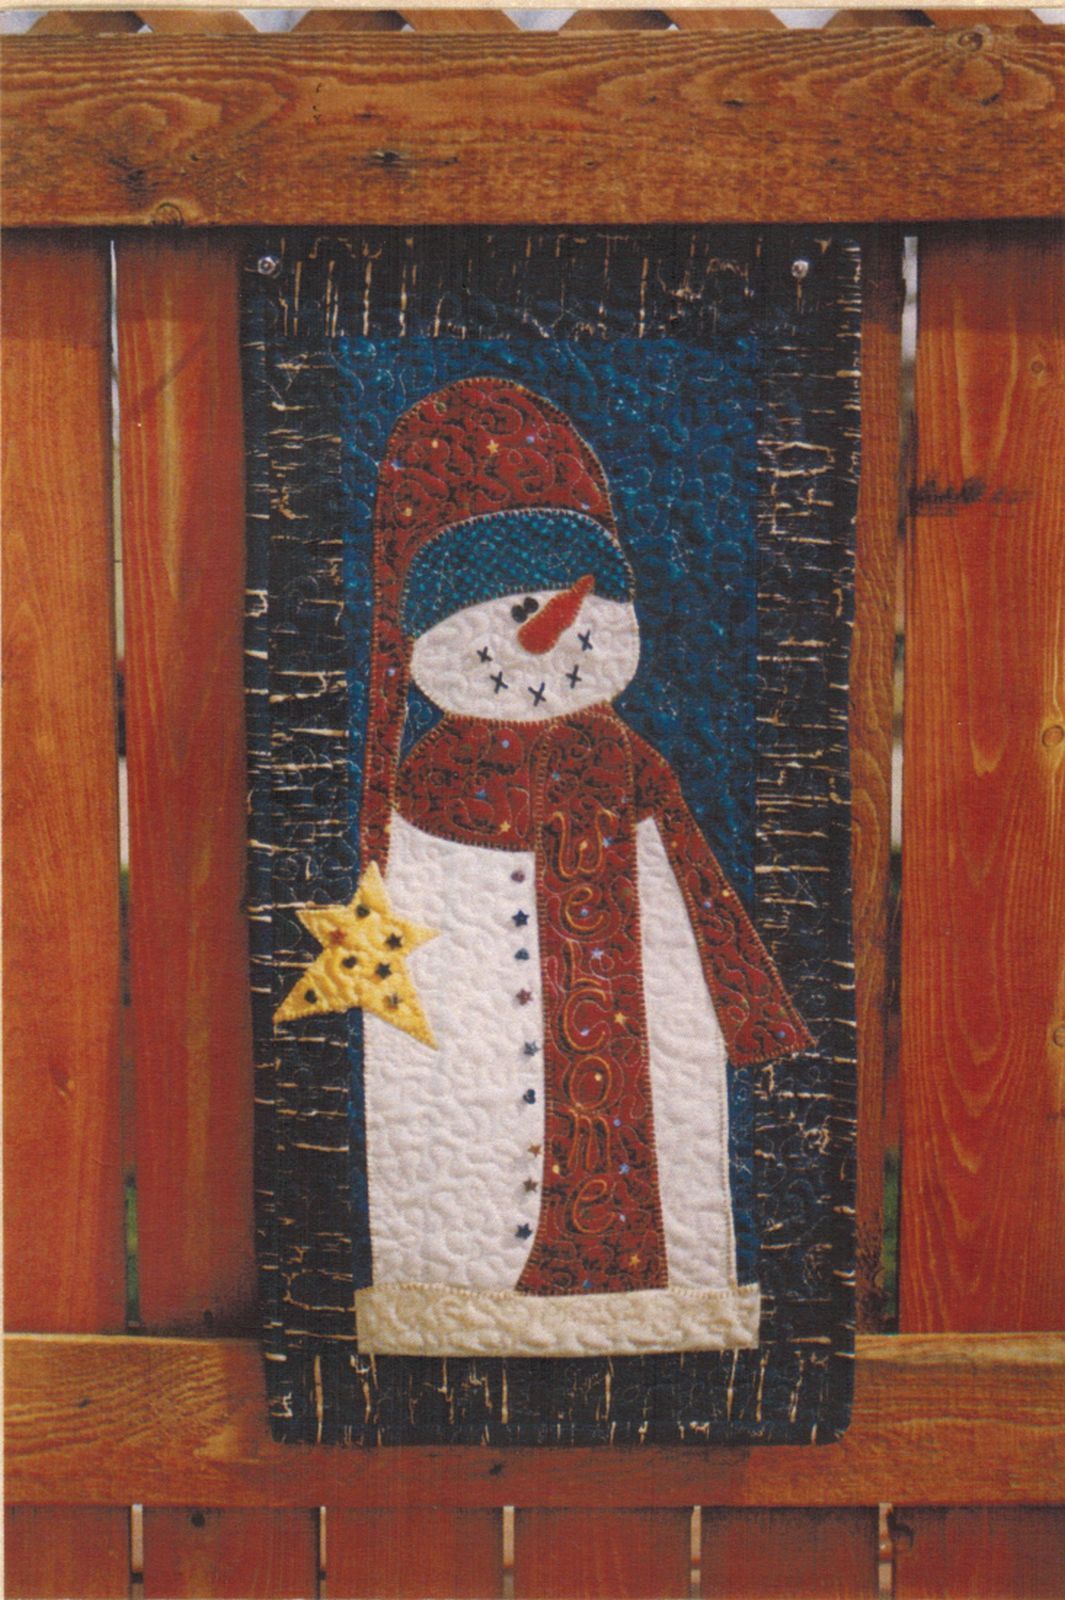 January Wall Banner Frosty Flake Snowman Pieced Applique Quilt Pattern 11" x 23" - $12.99